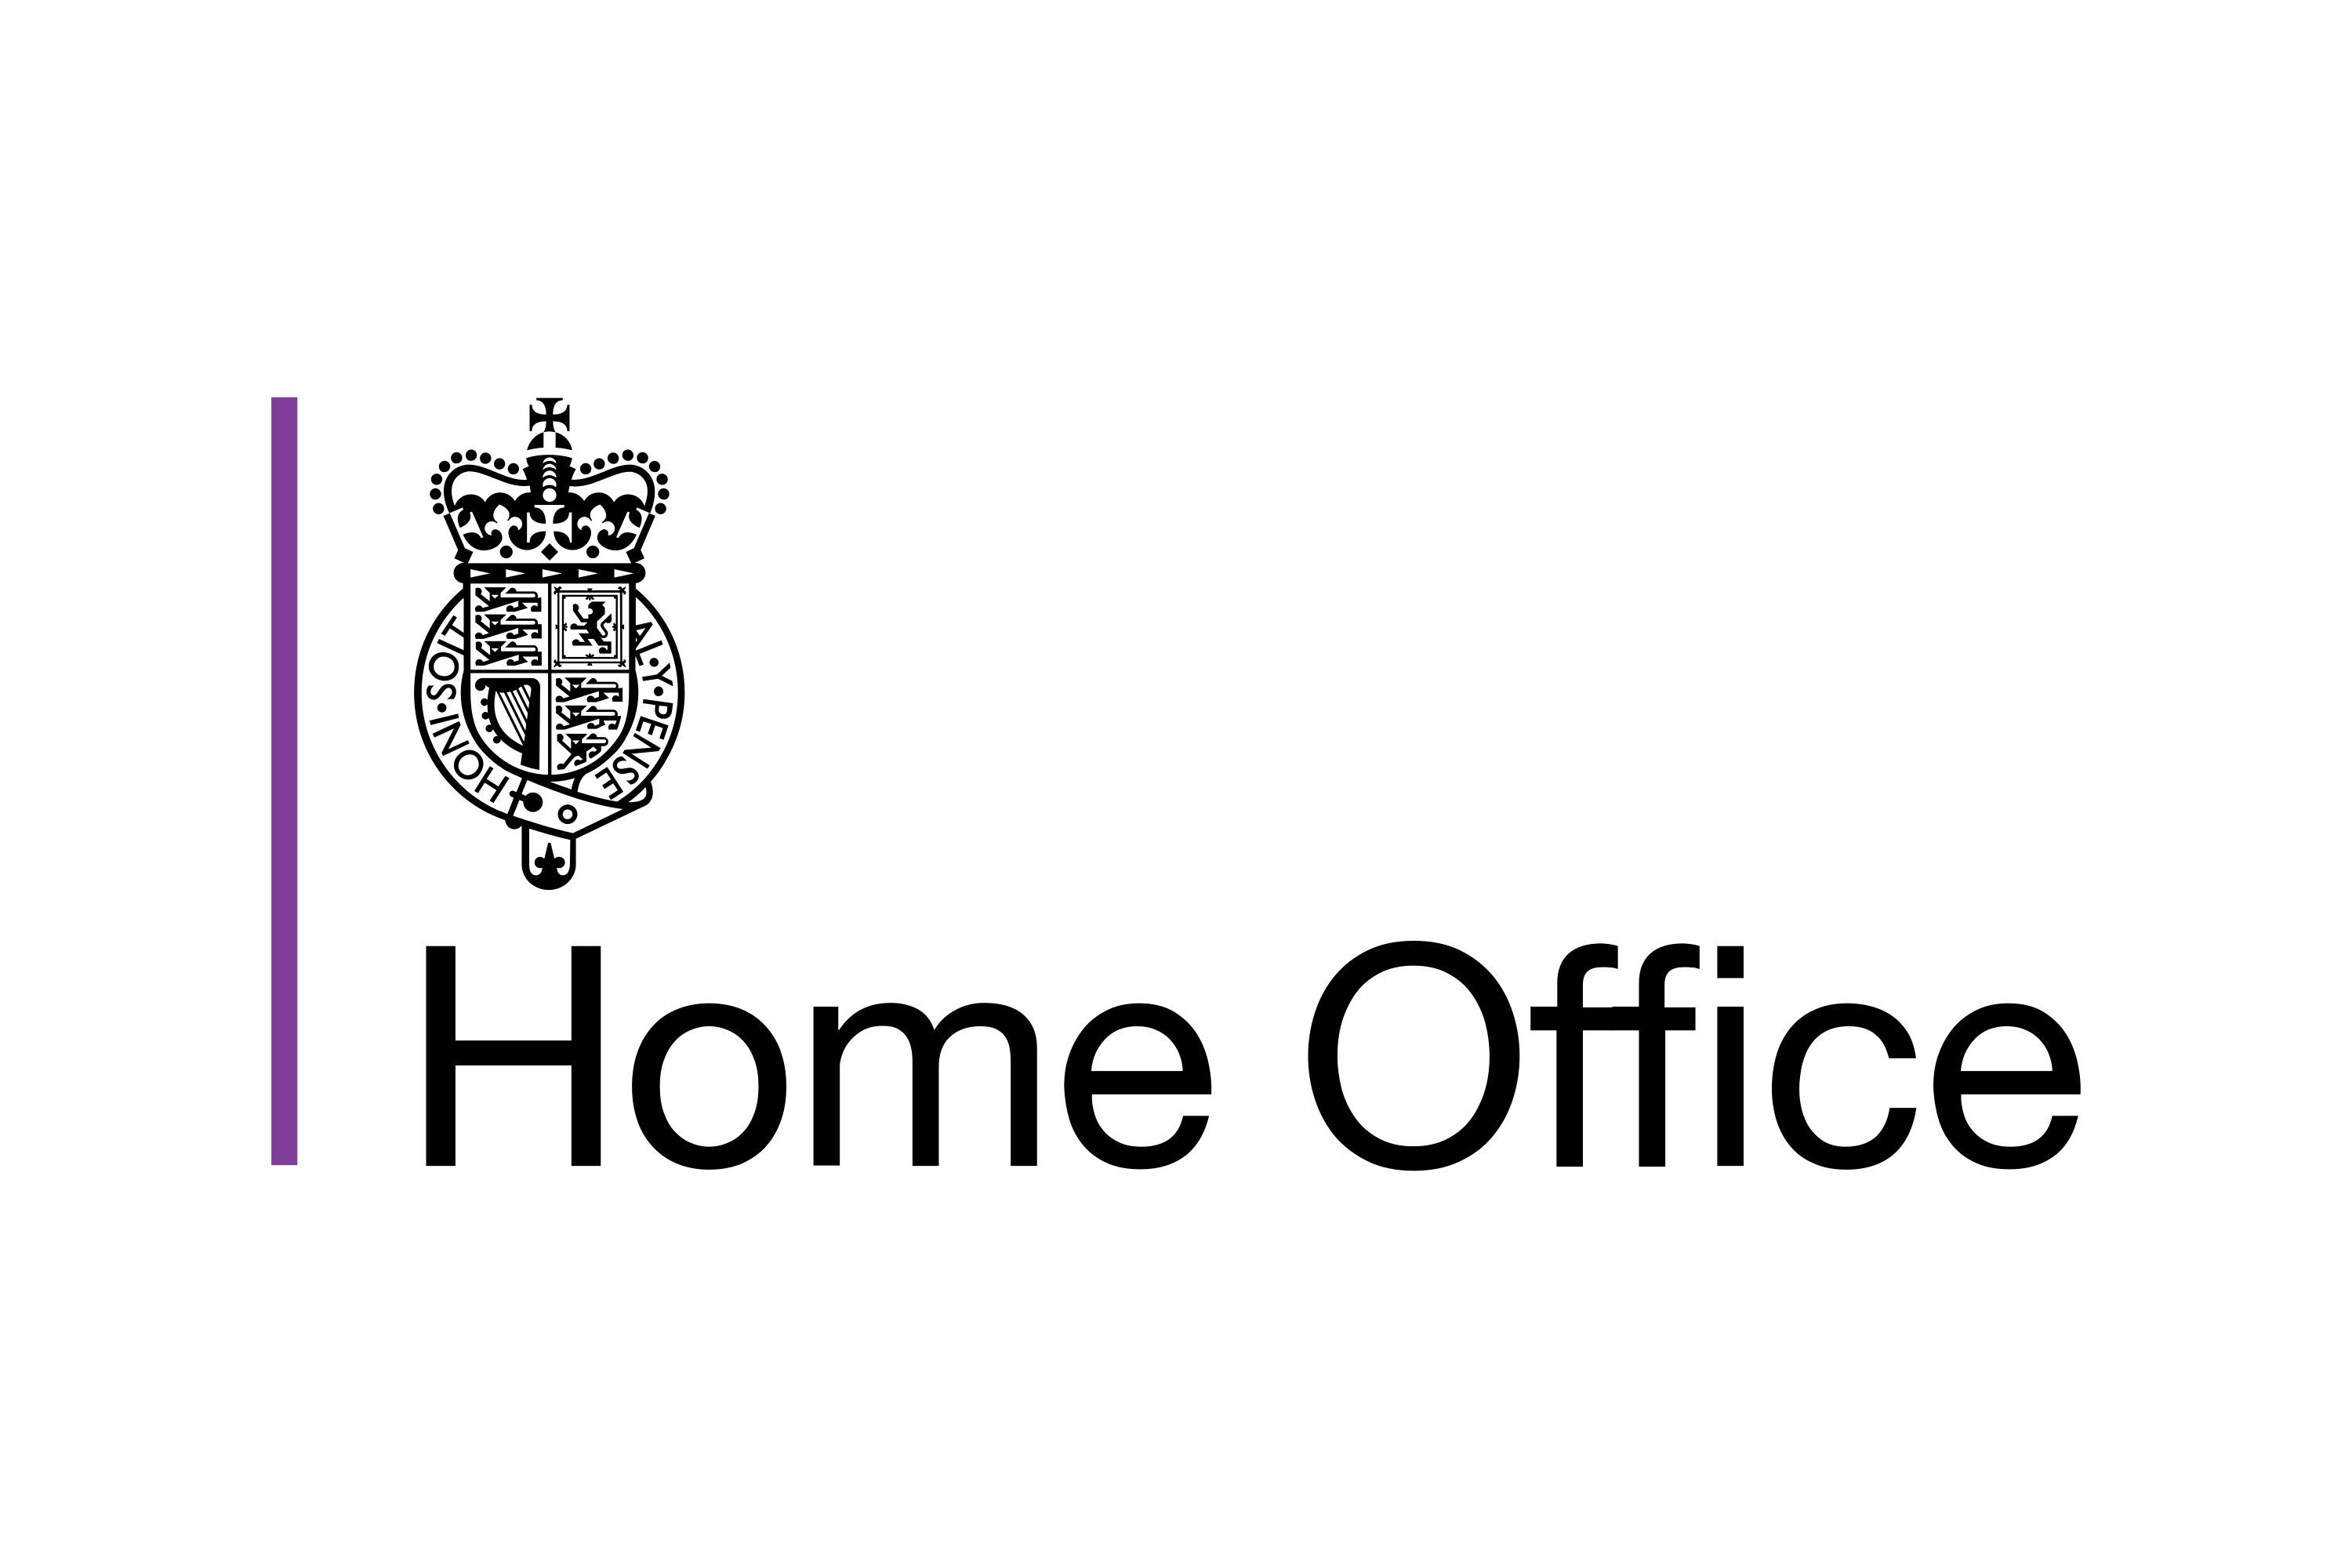 UK home office